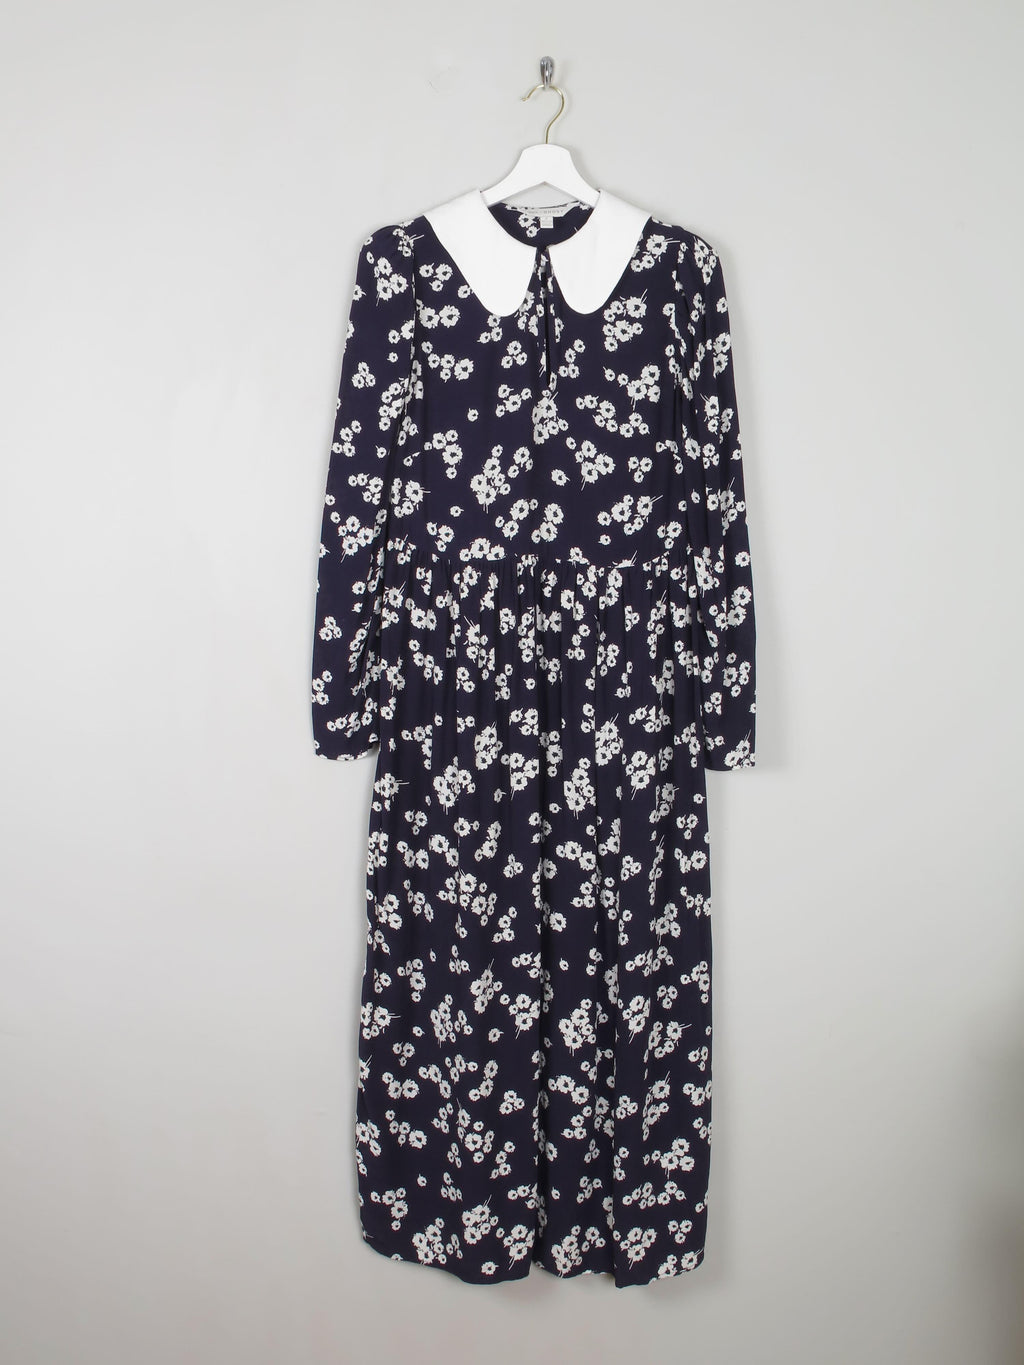 Navy & Ivory Floral Printed Ghost/M&S Dress With Collar  8 - The Harlequin